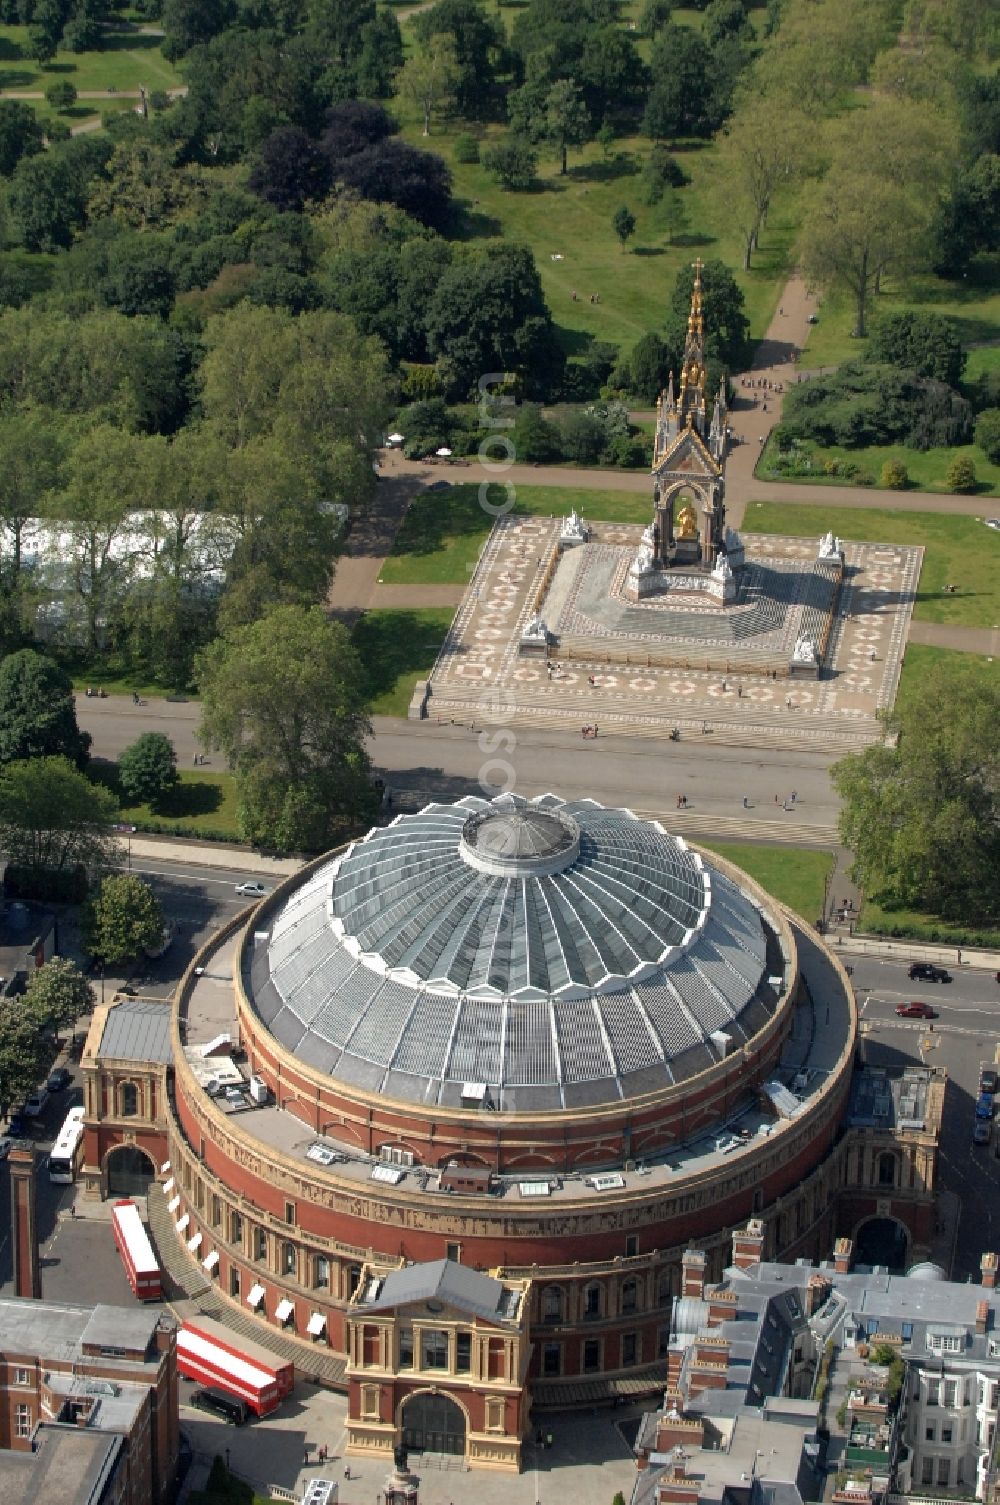 London from the bird's eye view: The Concert Hall / Banquet Hall Royal Albert Hall of Arts and Sciences in London. The 29 Opened in March 1871 building is located in Kensington in central London and is the usable part of the national memorial in honor of Prince Albert of Saxe-Coburg and Gotha, the husband of Queen Victoria. In the Albert Hall hosts various types of large events